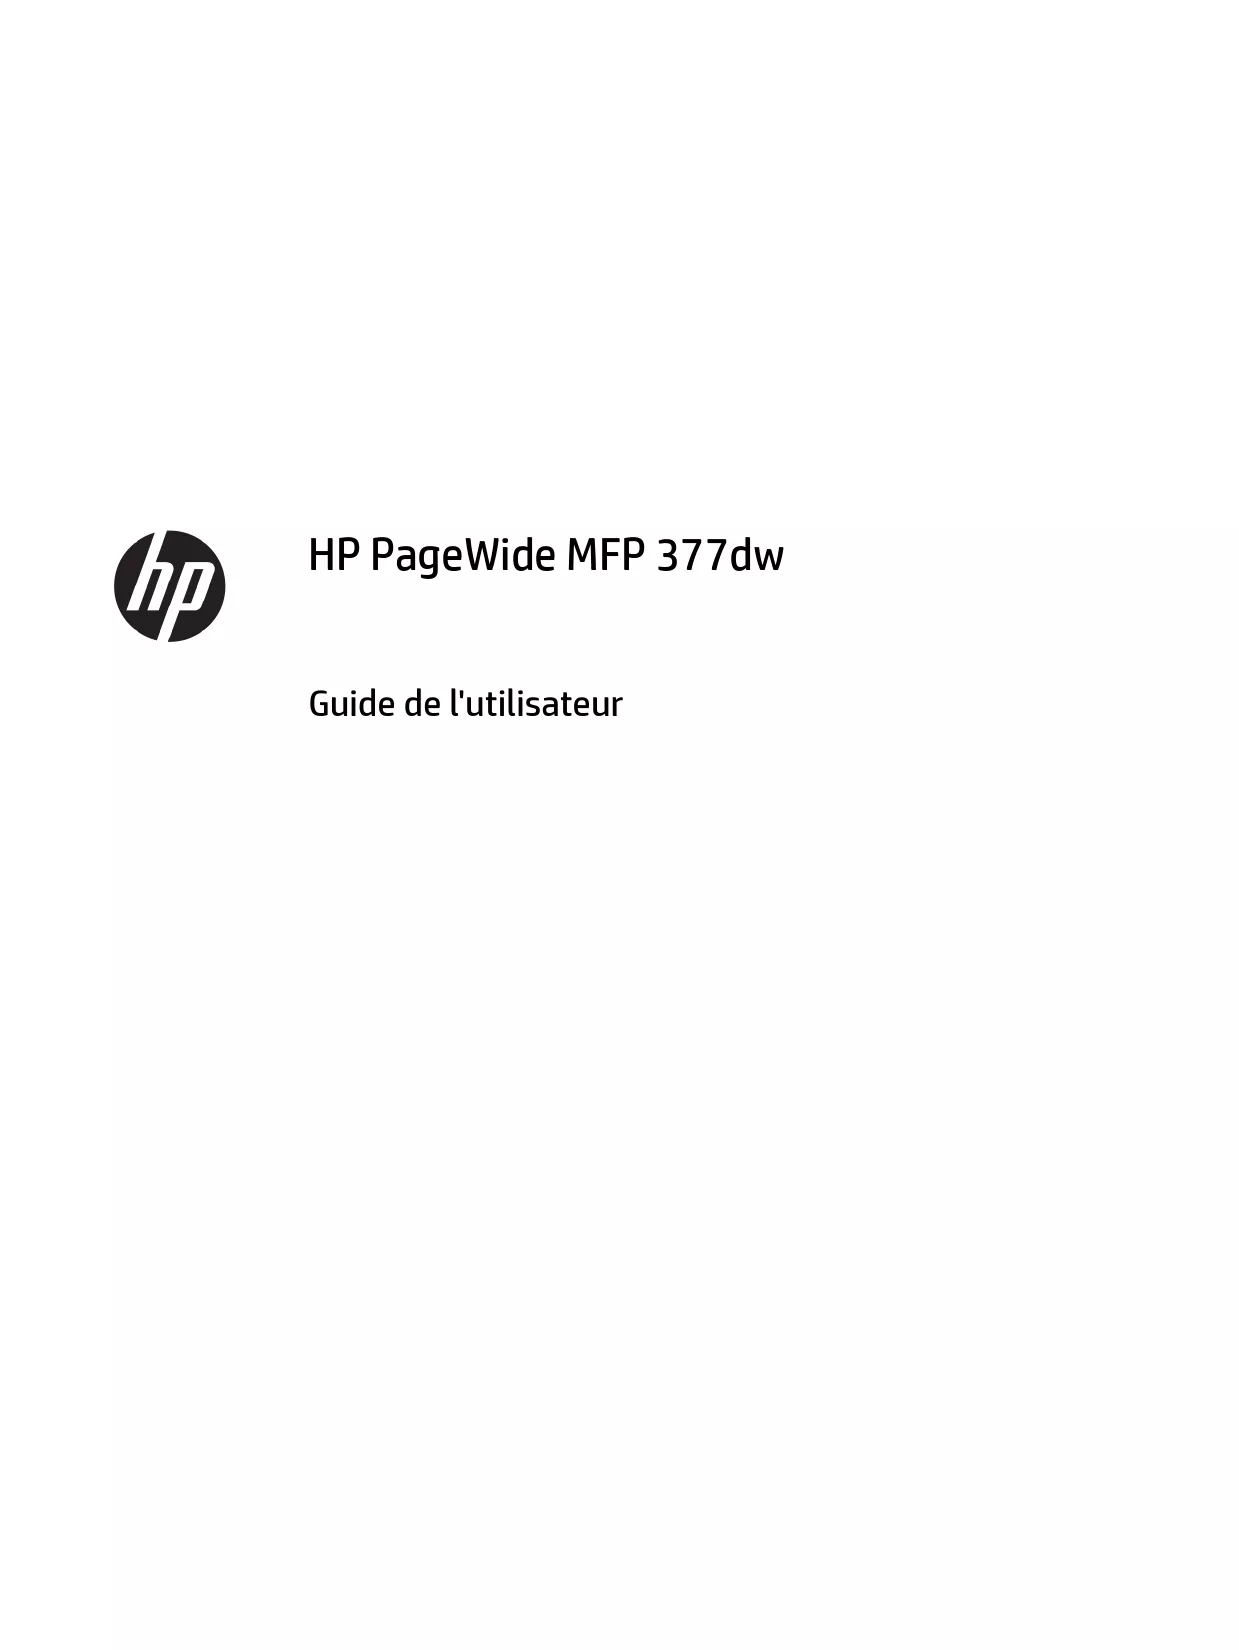 Mode d'emploi HP PAGEWIDE MFP 377DW